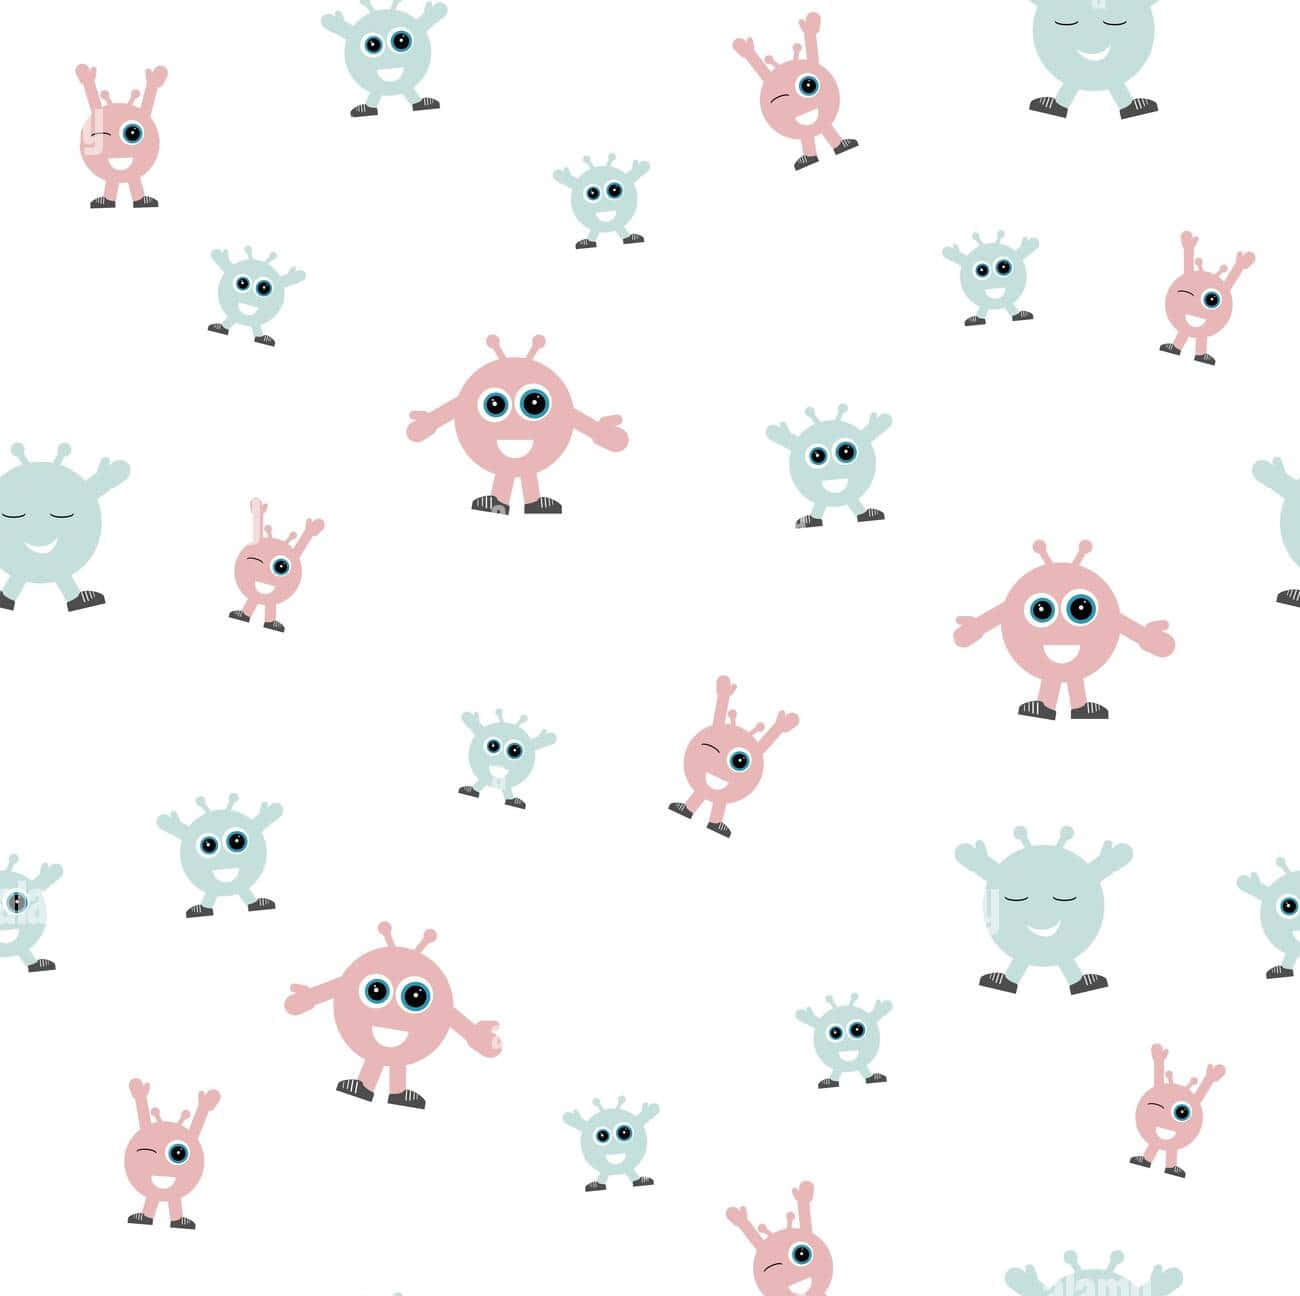 A Pattern Of Cute Little Monsters On A White Background Wallpaper